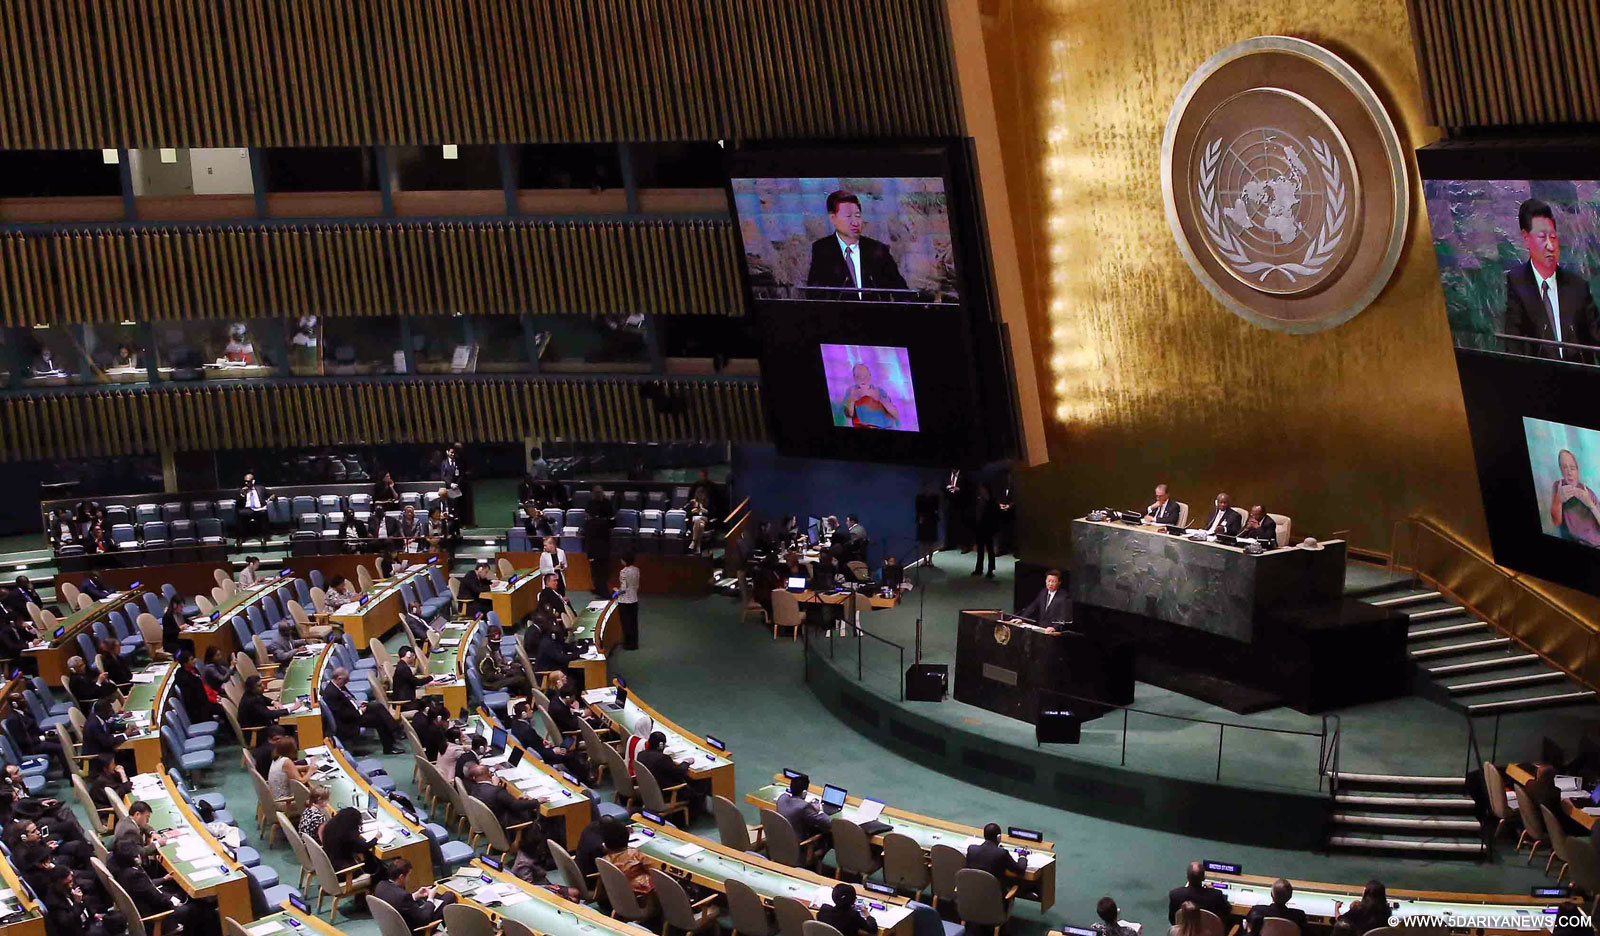  Chinese President Xi Jinping addresses the United Nations Sustainable Development Summit 2015 at the UN headquarters in New York